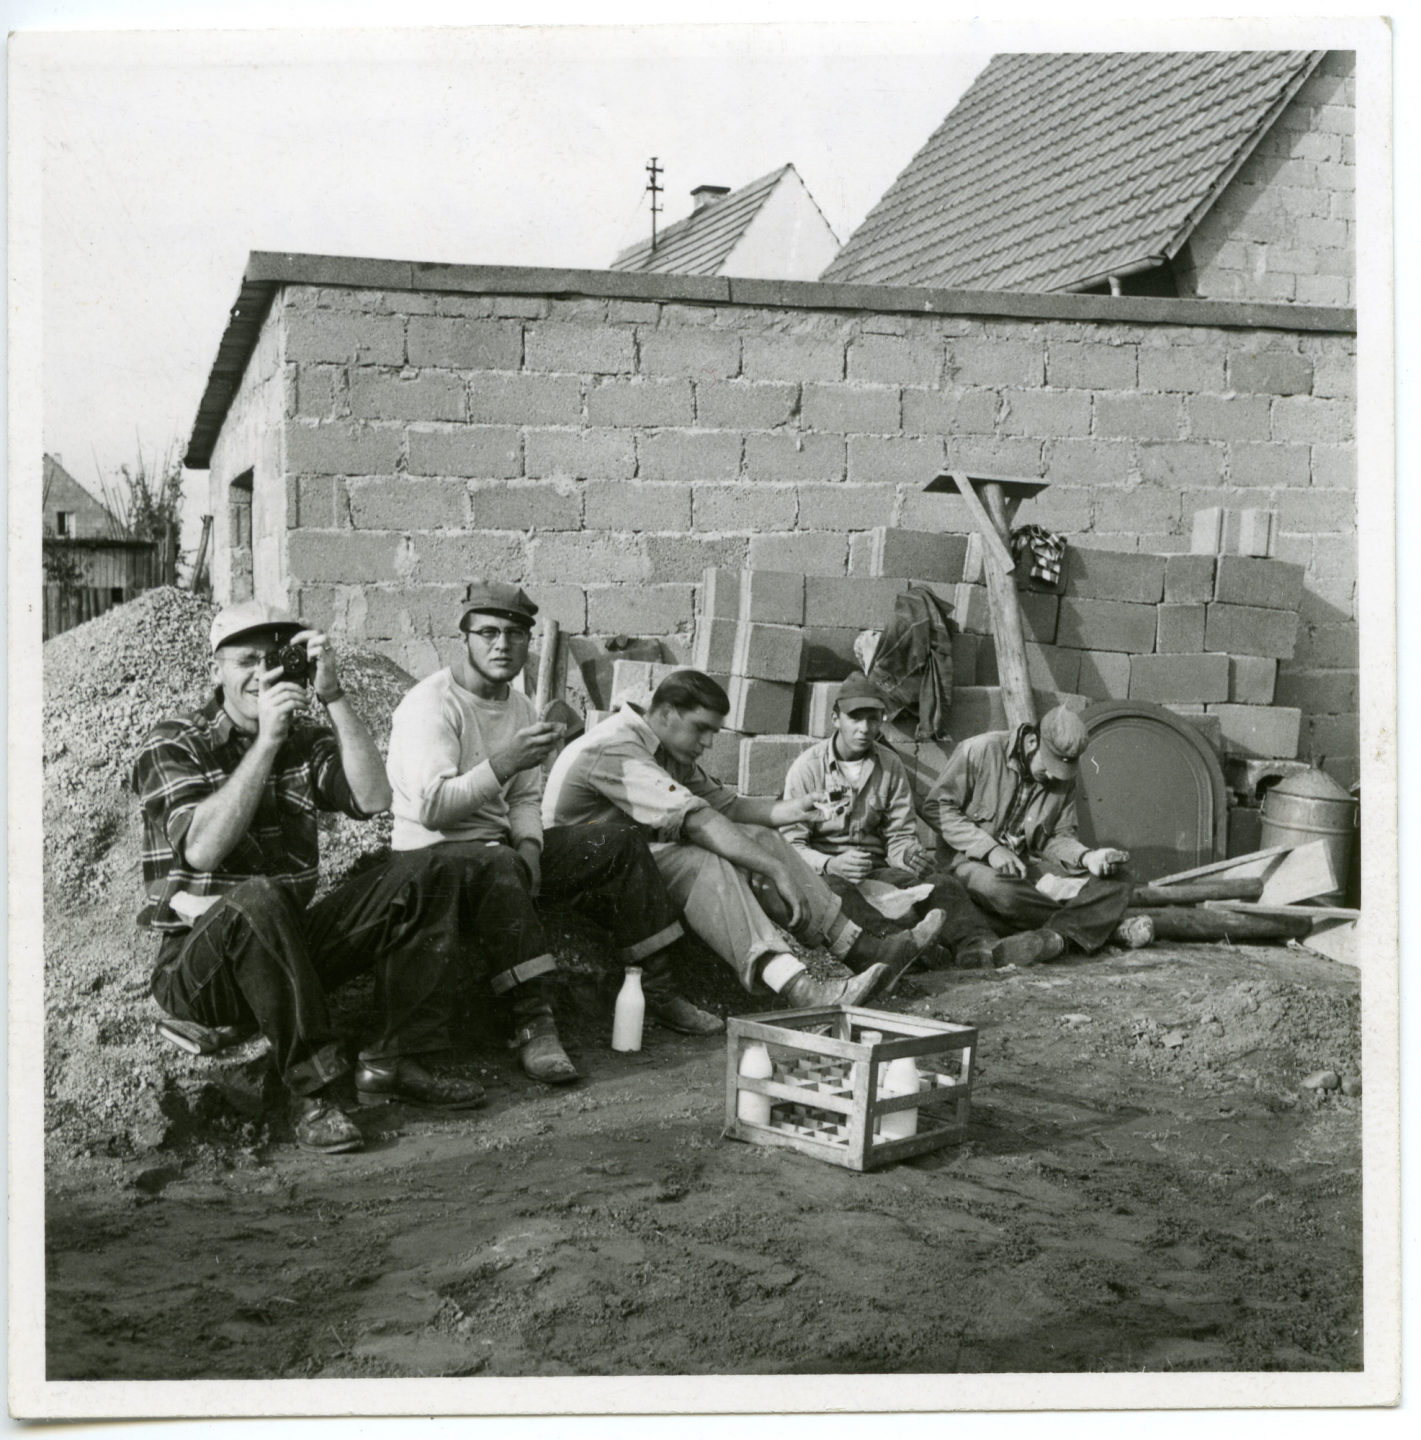 A black and white photo from the 1950s of men taking a break from their work to have a snack